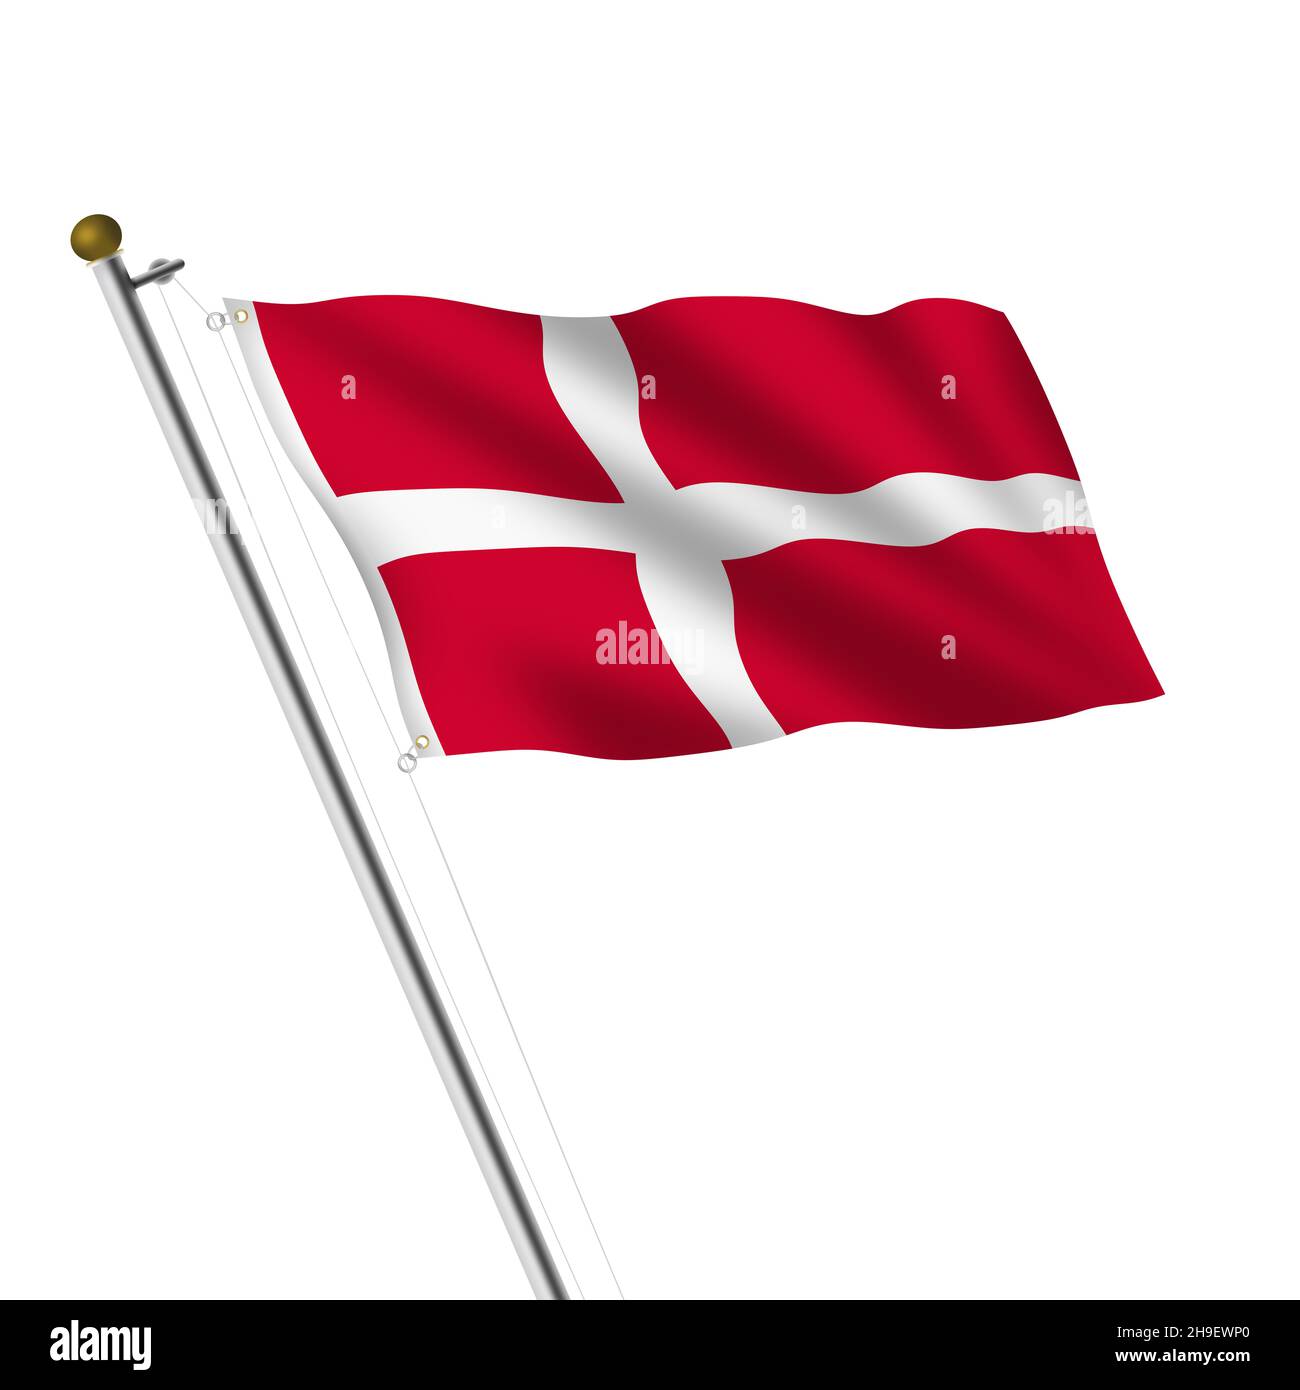 Denmark Flagpole 3d illustration on white with clipping path Stock Photo